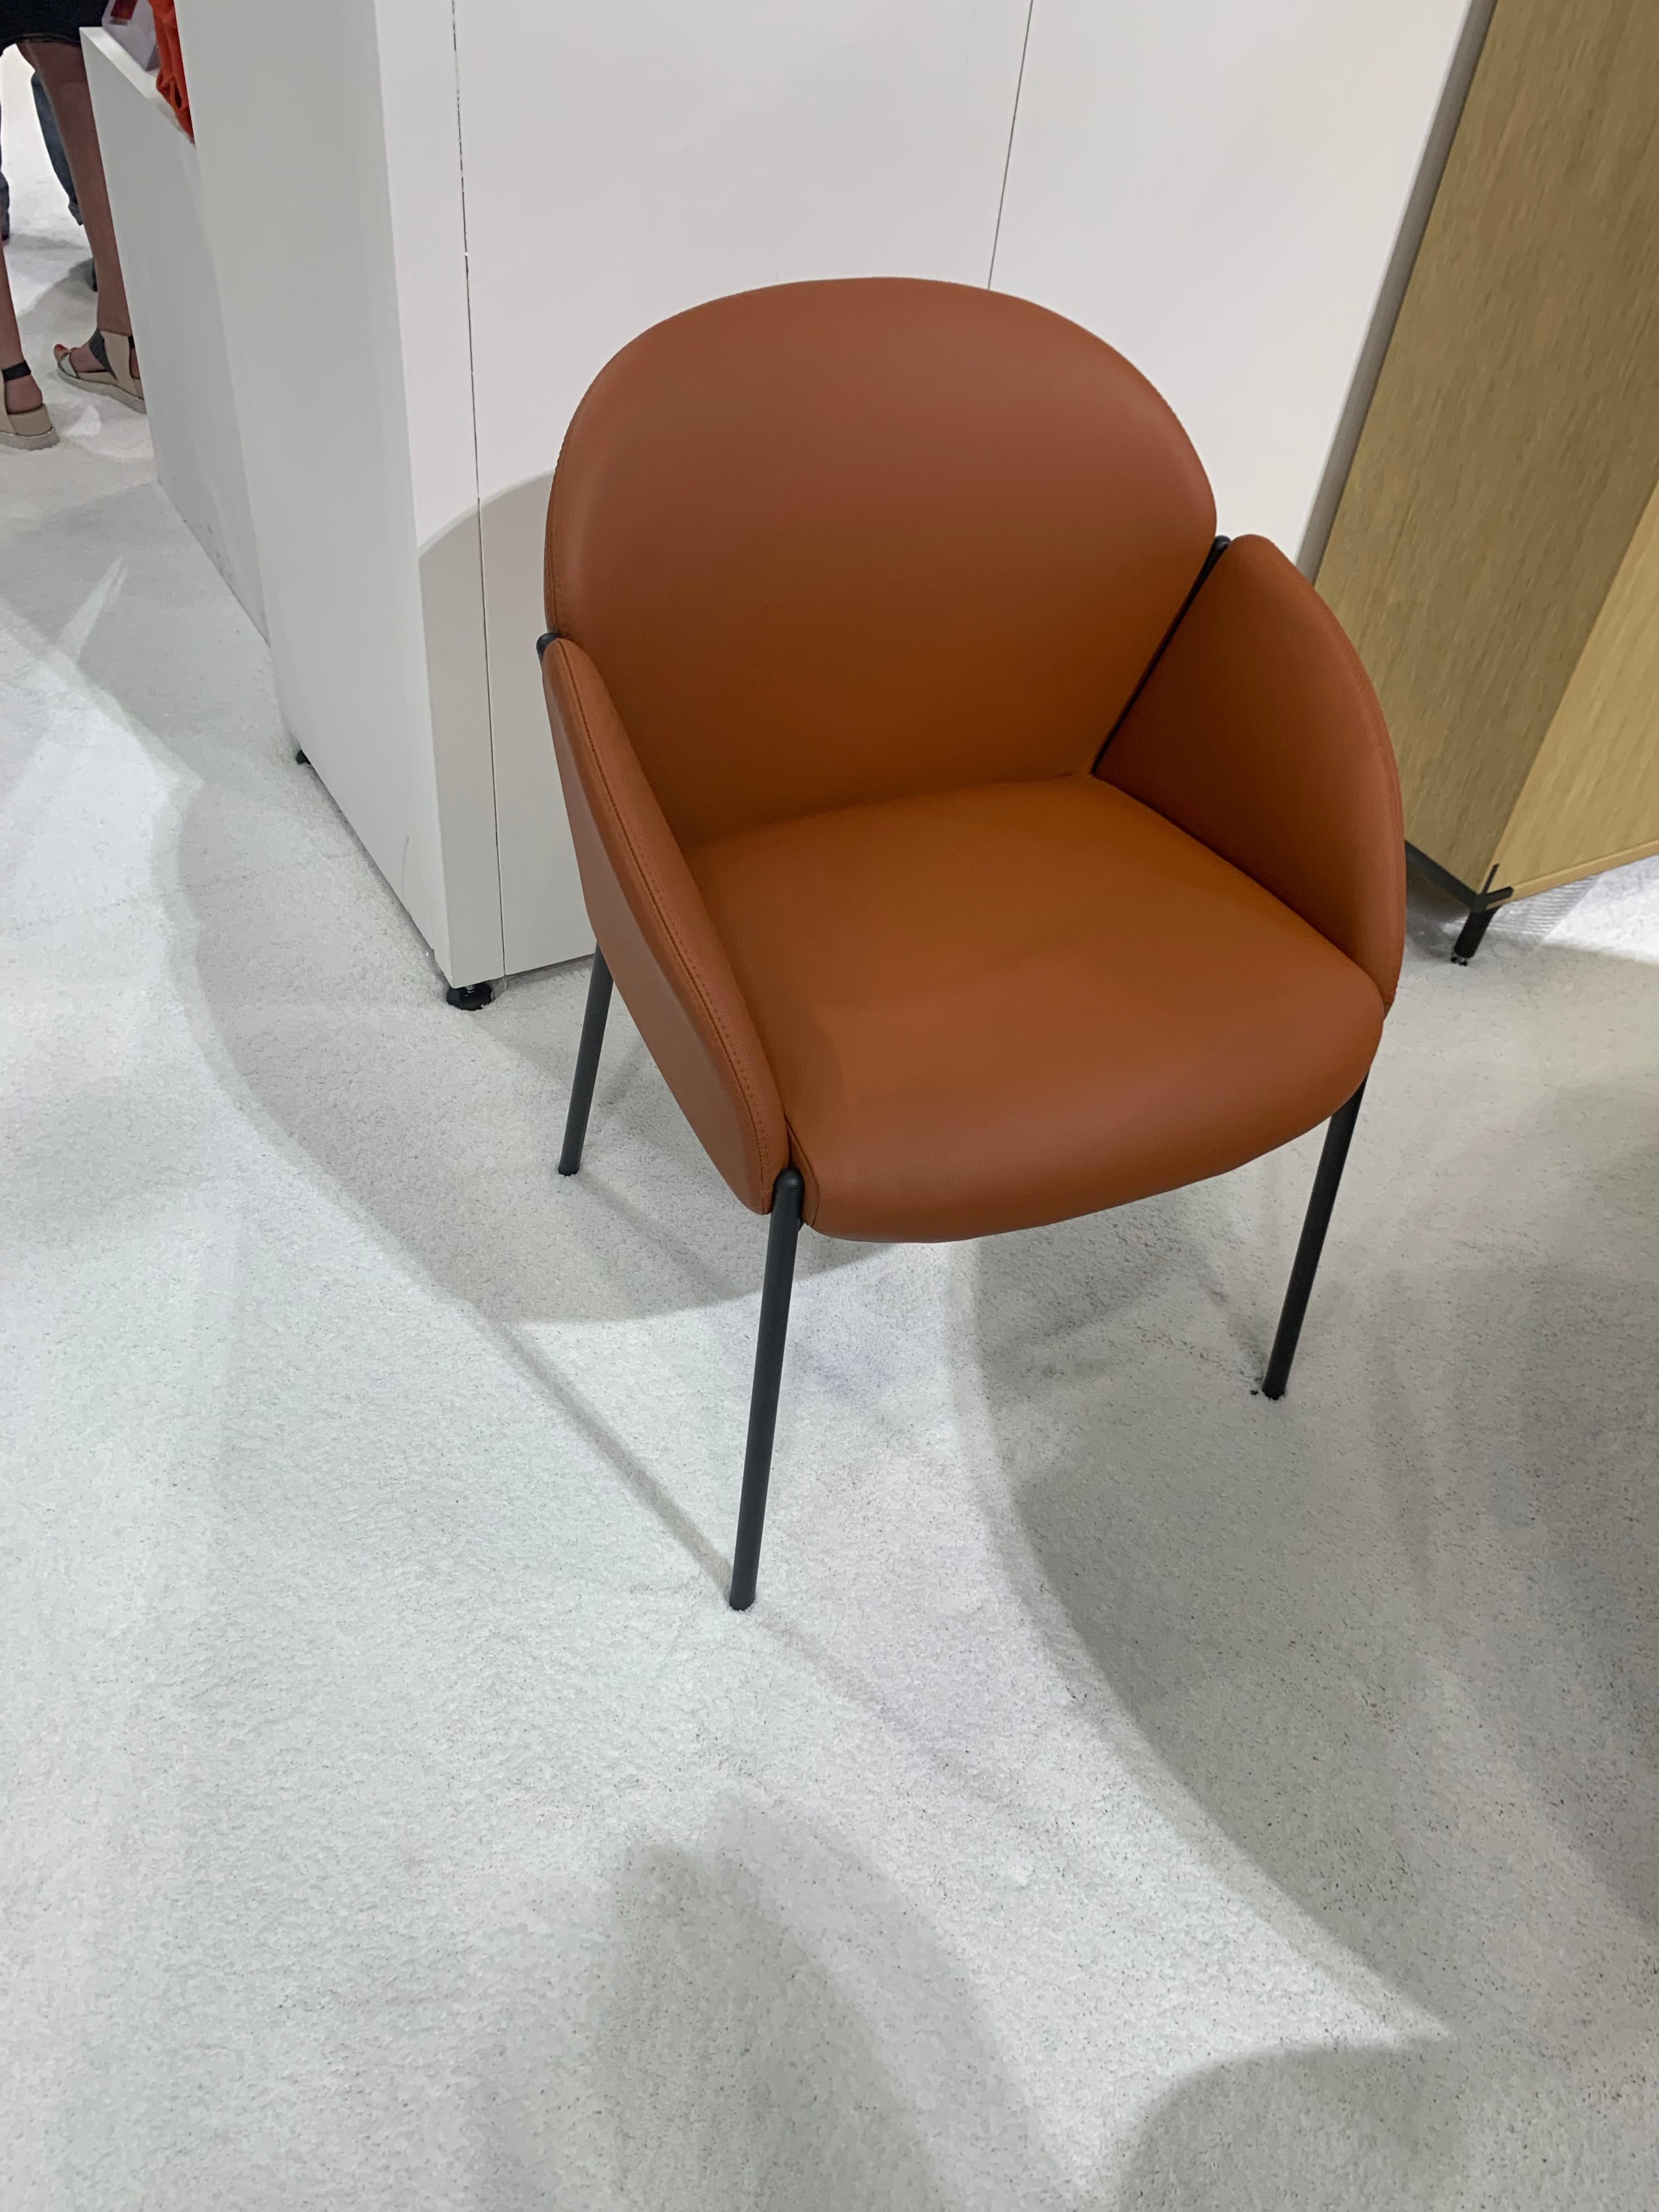 Andrea Claesson Koivisto Rune design 2018
Leather: Artifort Ox, 5080 Cognac (EE)
Base: P57 Black grey
Soft, rather rounded and inviting. The shape of the Andrea chair is like a blooming flower, equally pleasing to view from any angle. The dining